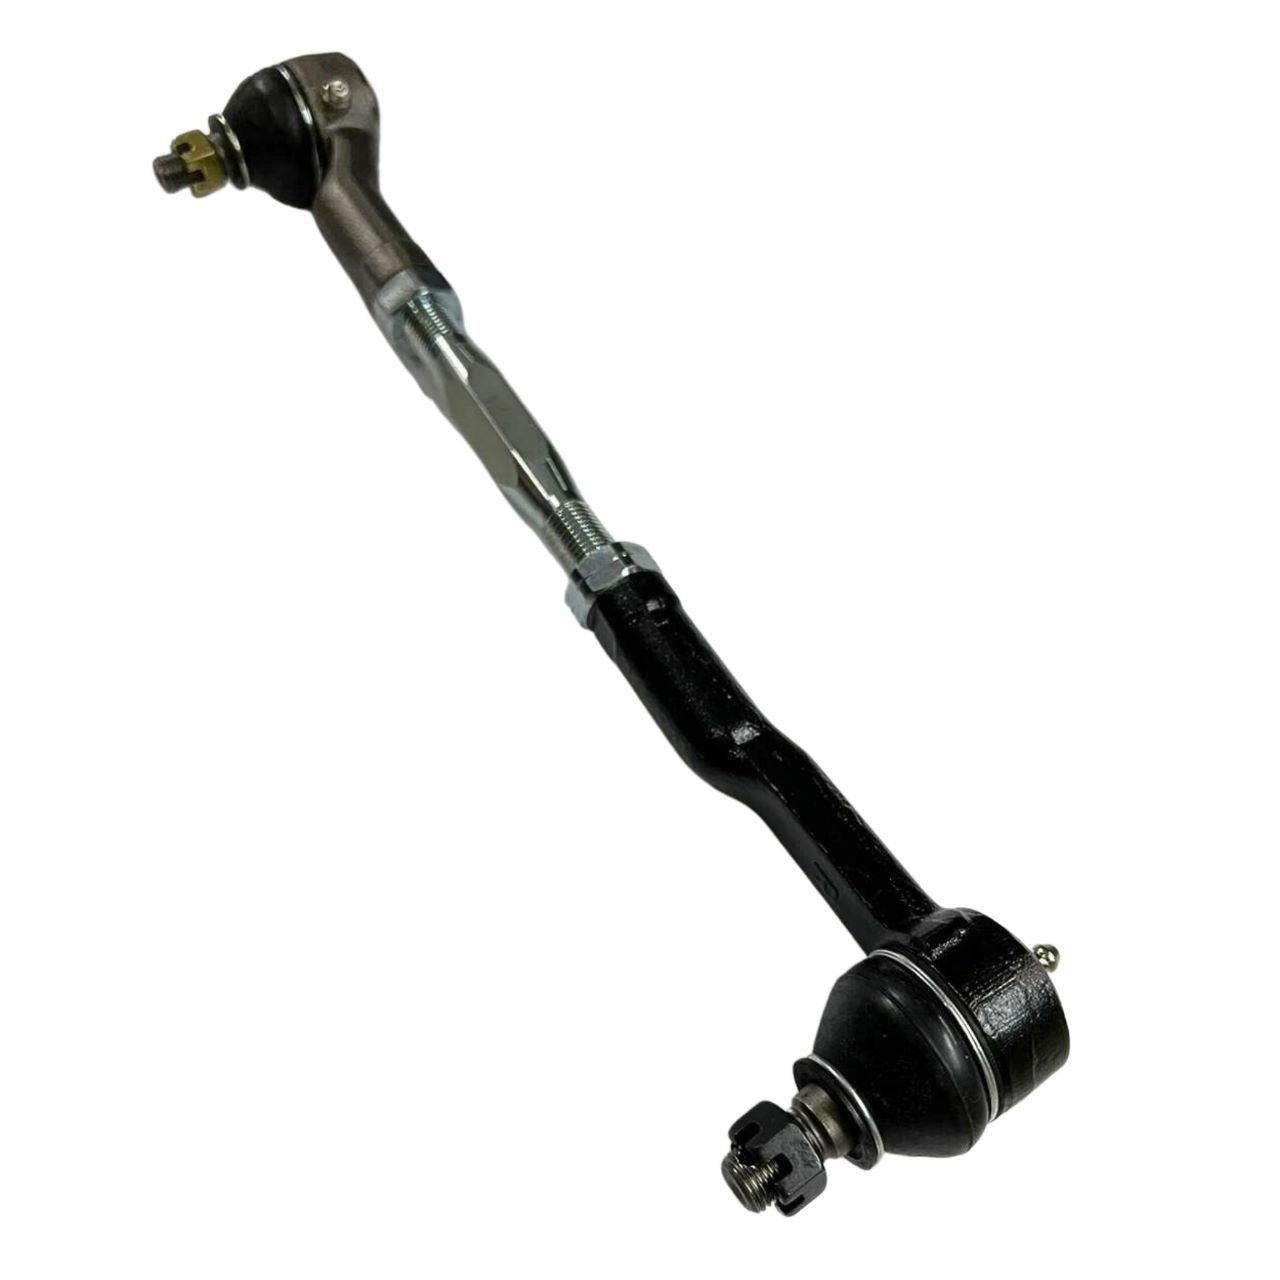 1600 180B LH side rod assembly complete with rod ends, tie rod & lock nuts